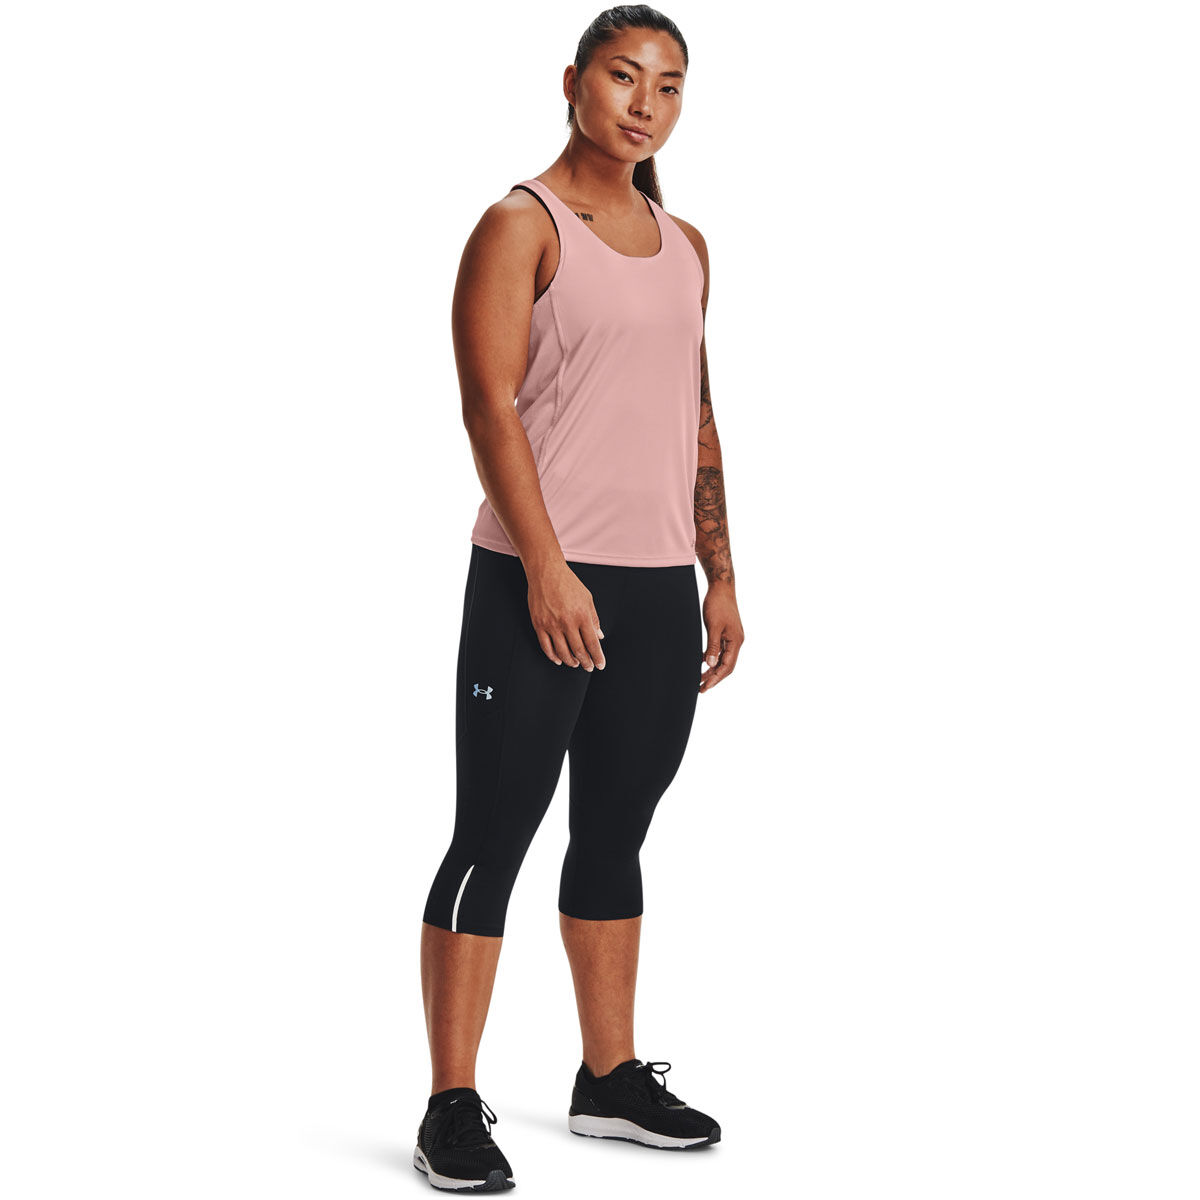 Womens compression leggings Under Armour FLY FAST 3.0 TIGHT W